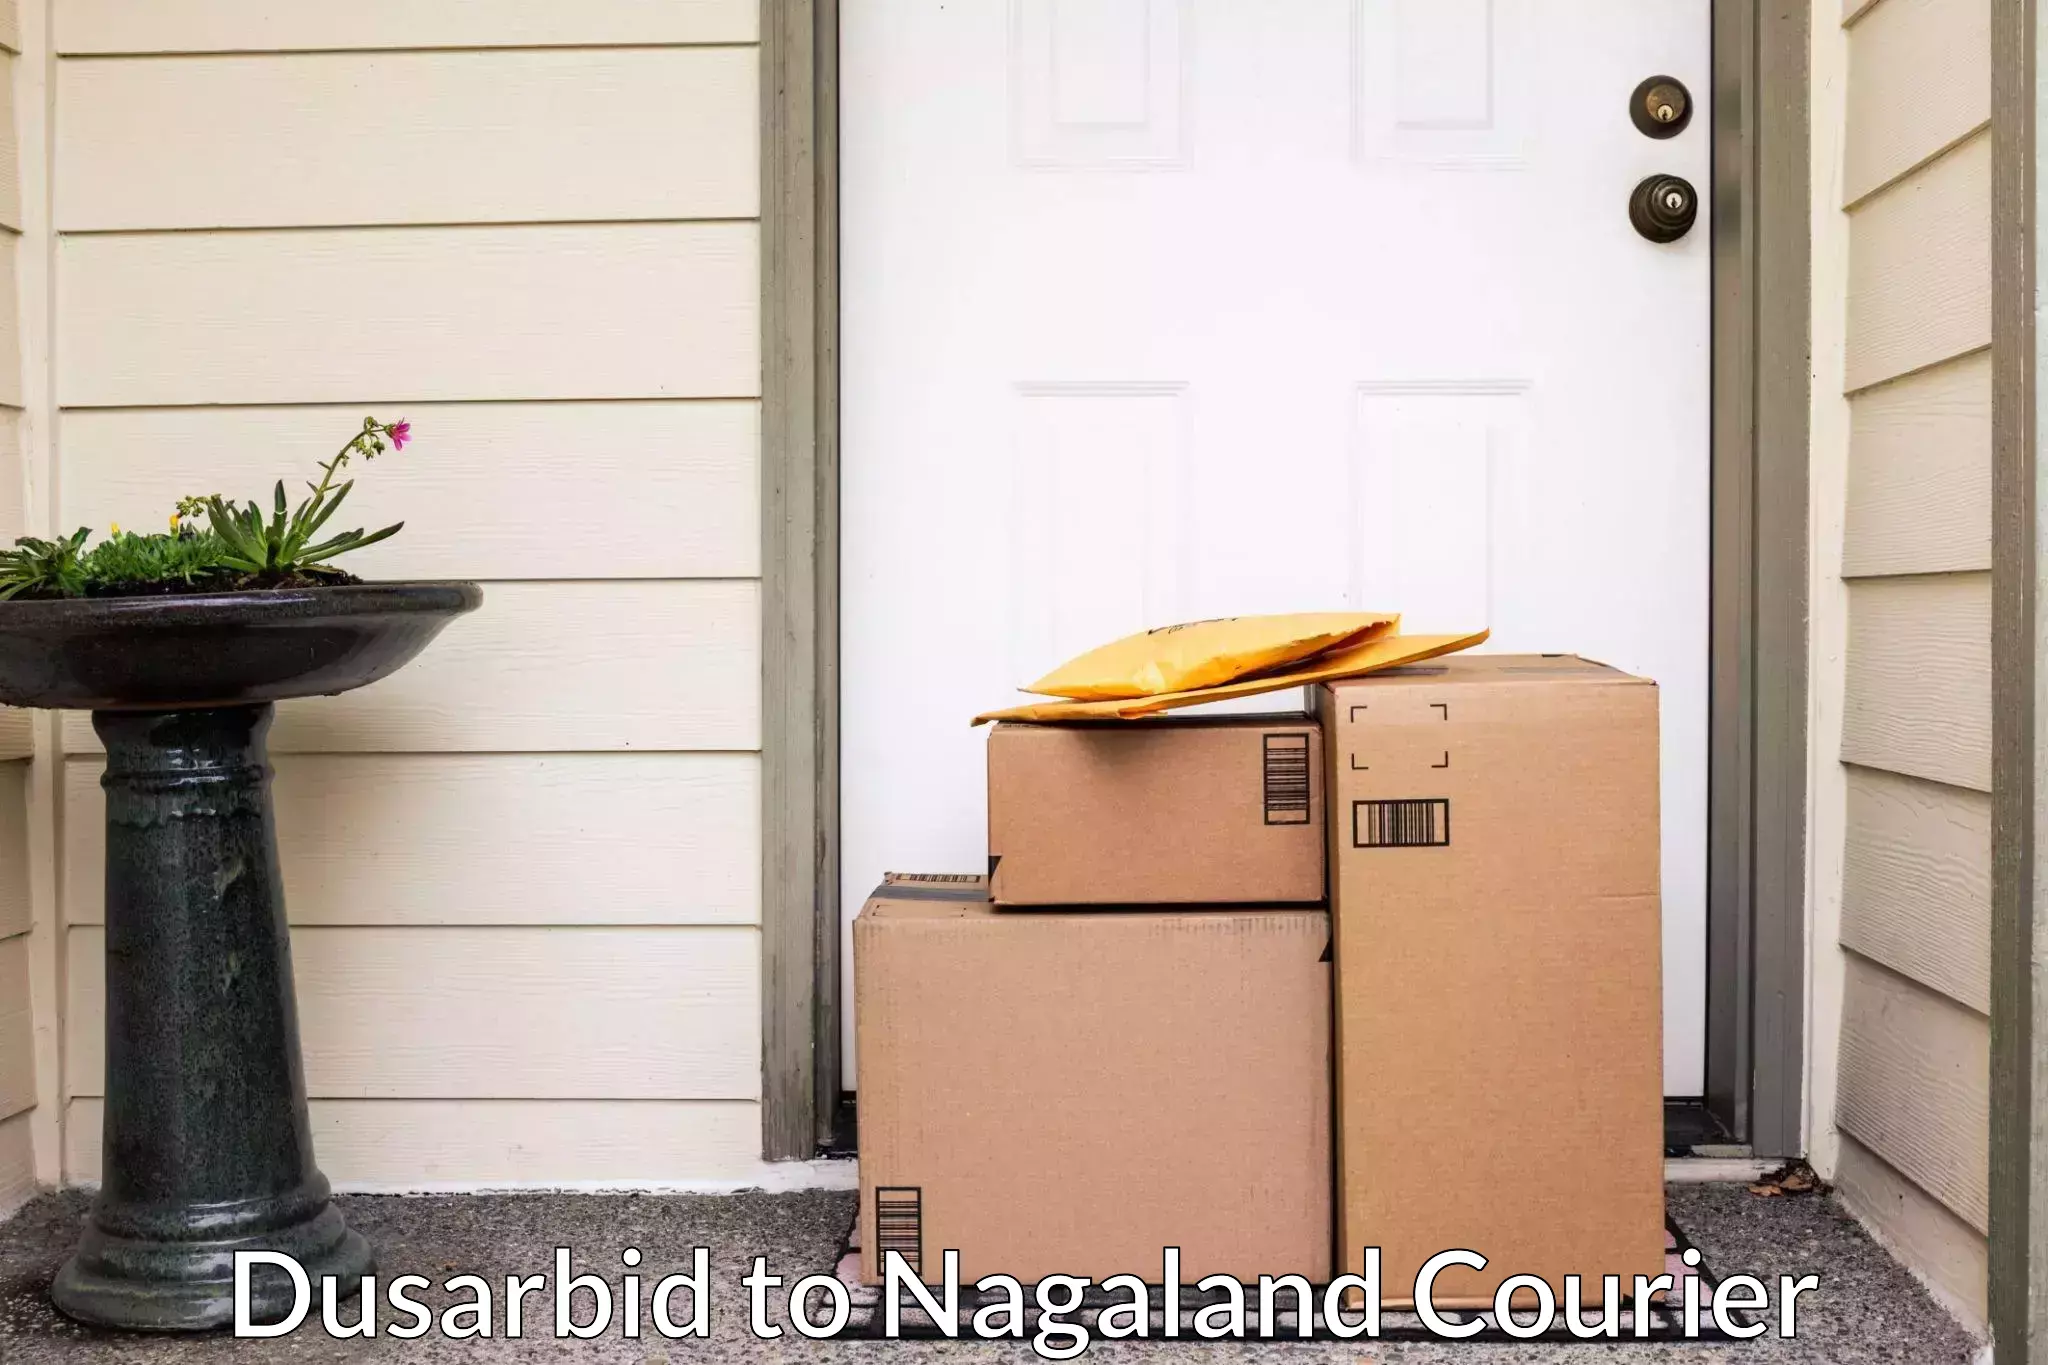 Hassle-free relocation in Dusarbid to Mon